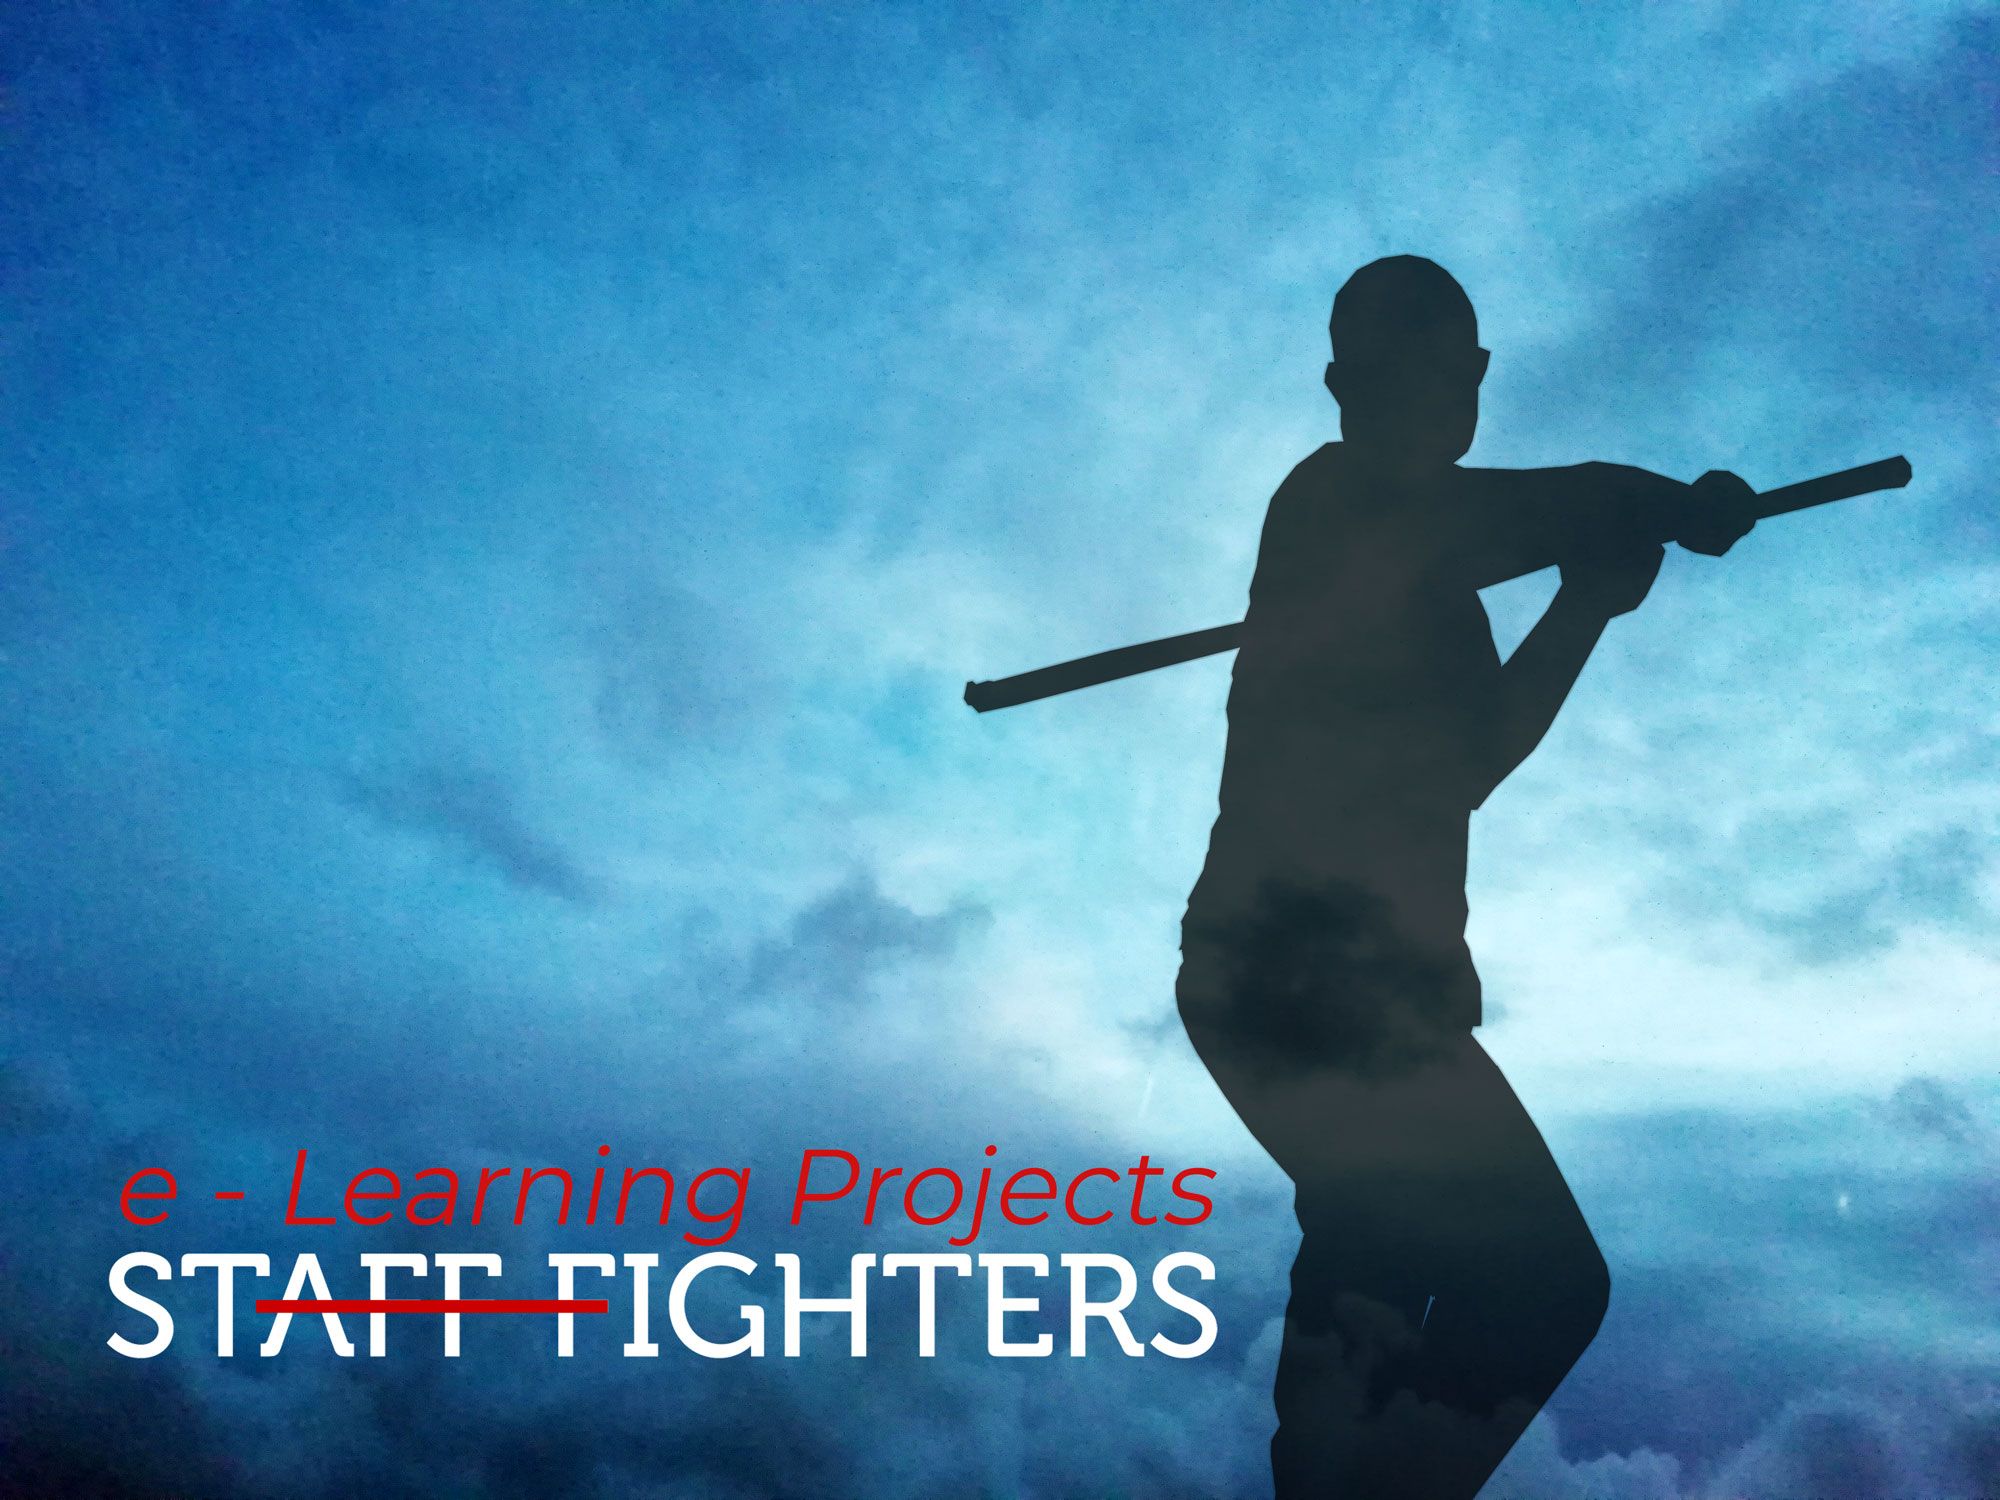 elearning projects stafffighters